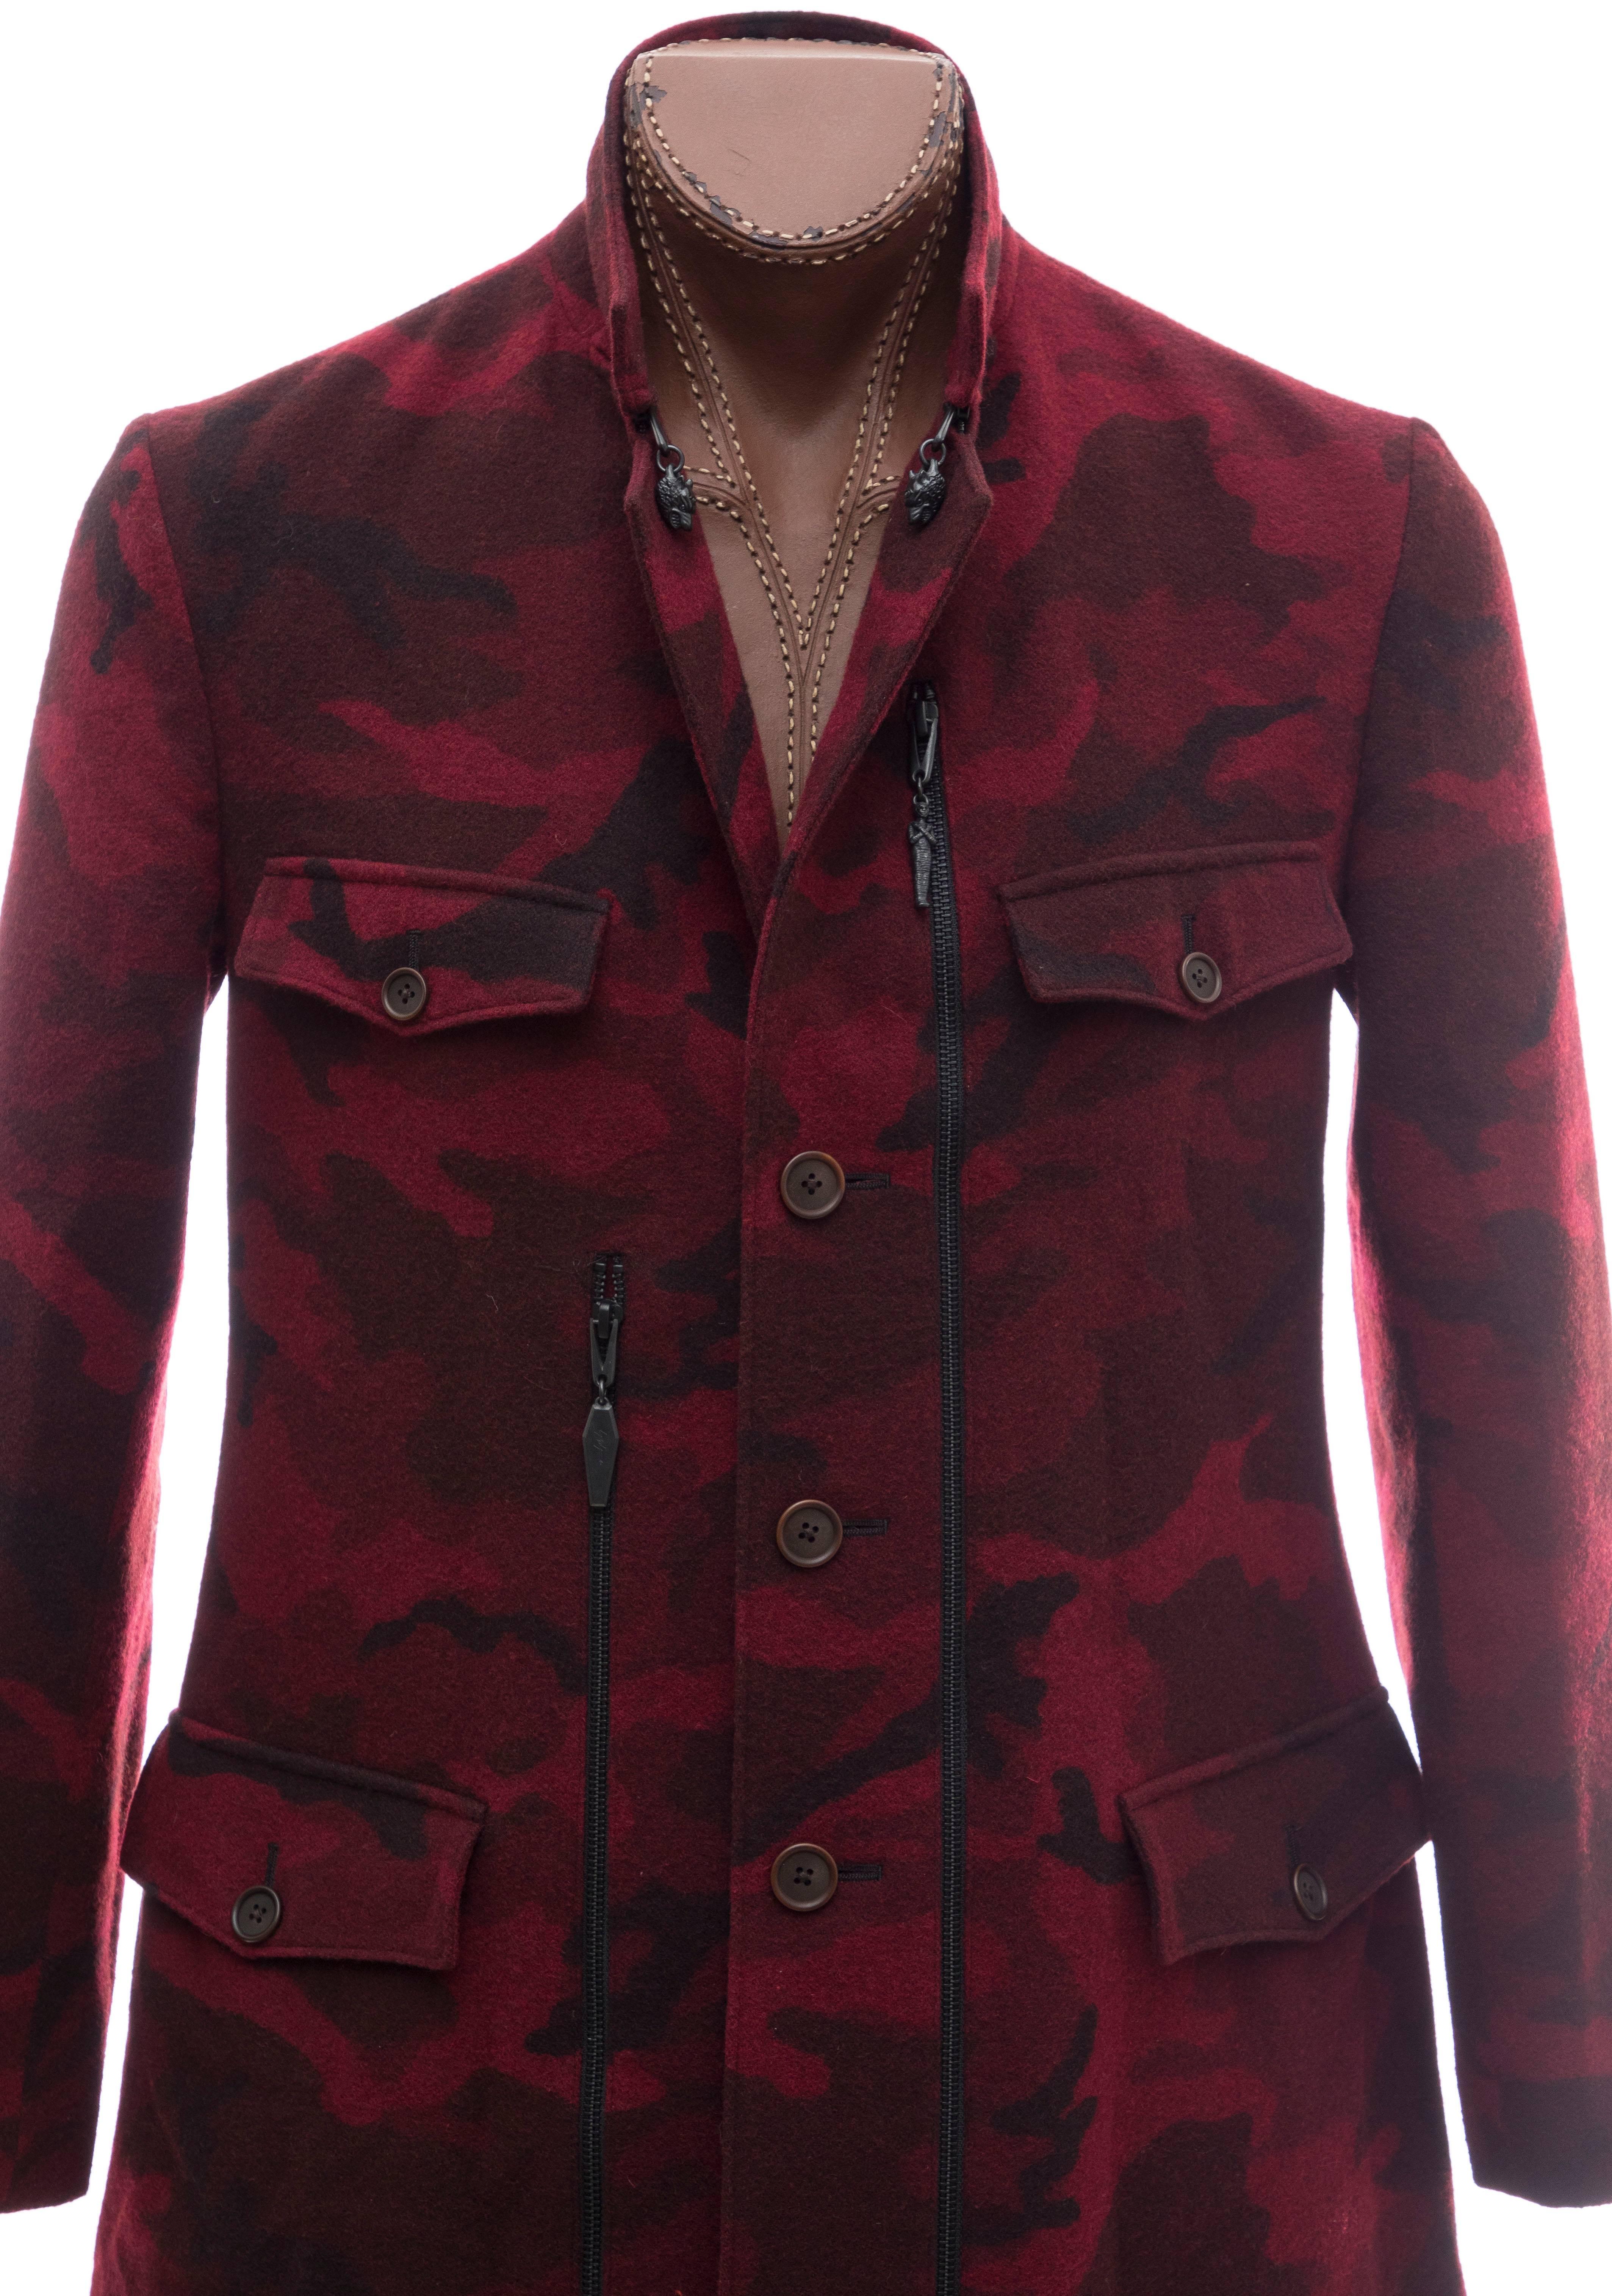 Yohji Yamamoto Pour Homme Wool Camouflage Chesterfield Coat, Fall 2014 In Excellent Condition For Sale In Cincinnati, OH